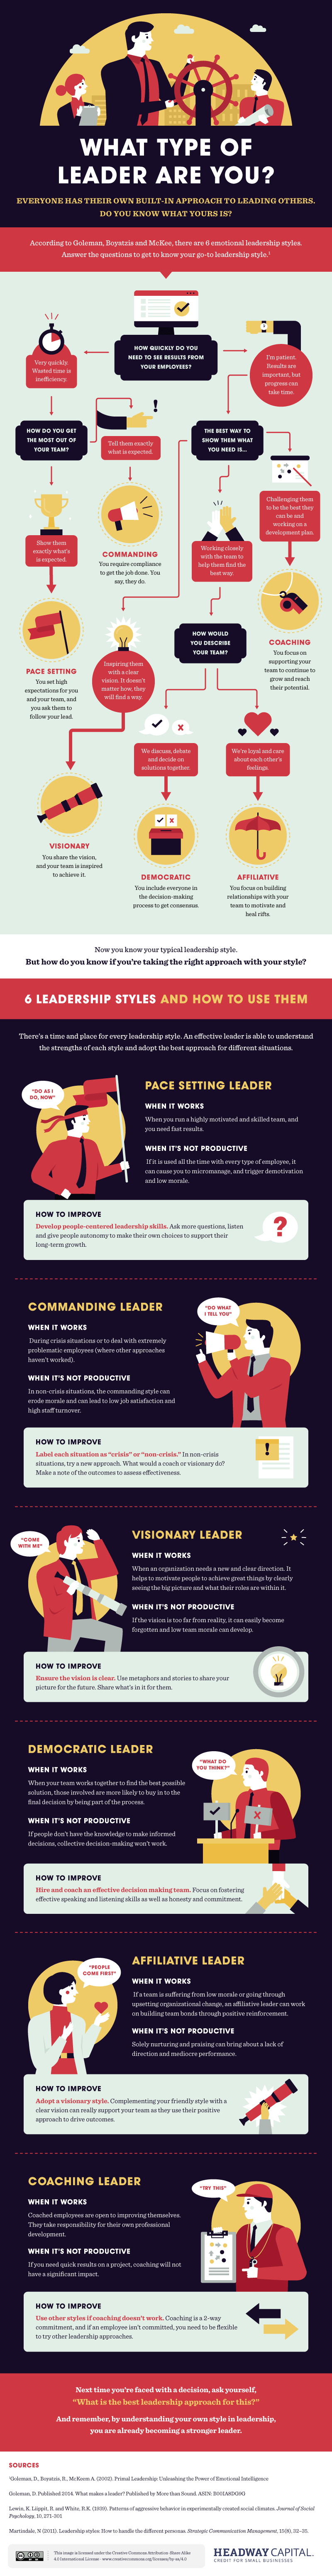 leader infographic